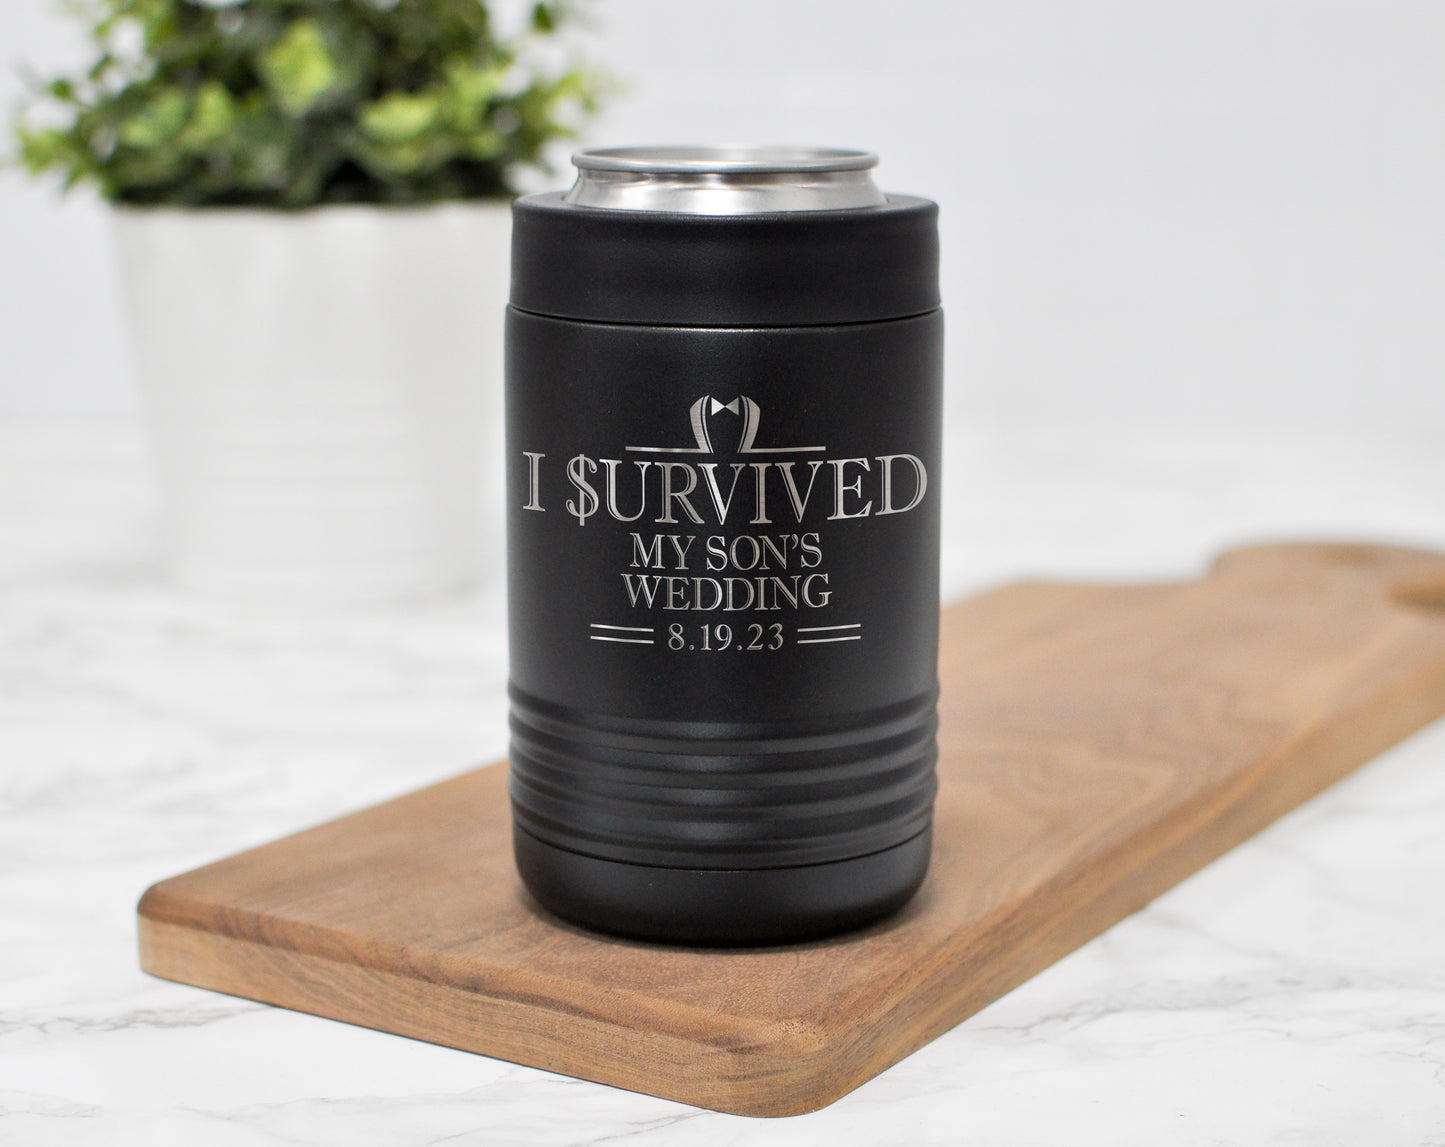 I Survived My Daughter's Wedding Can Holder | Father of the Bride Gift